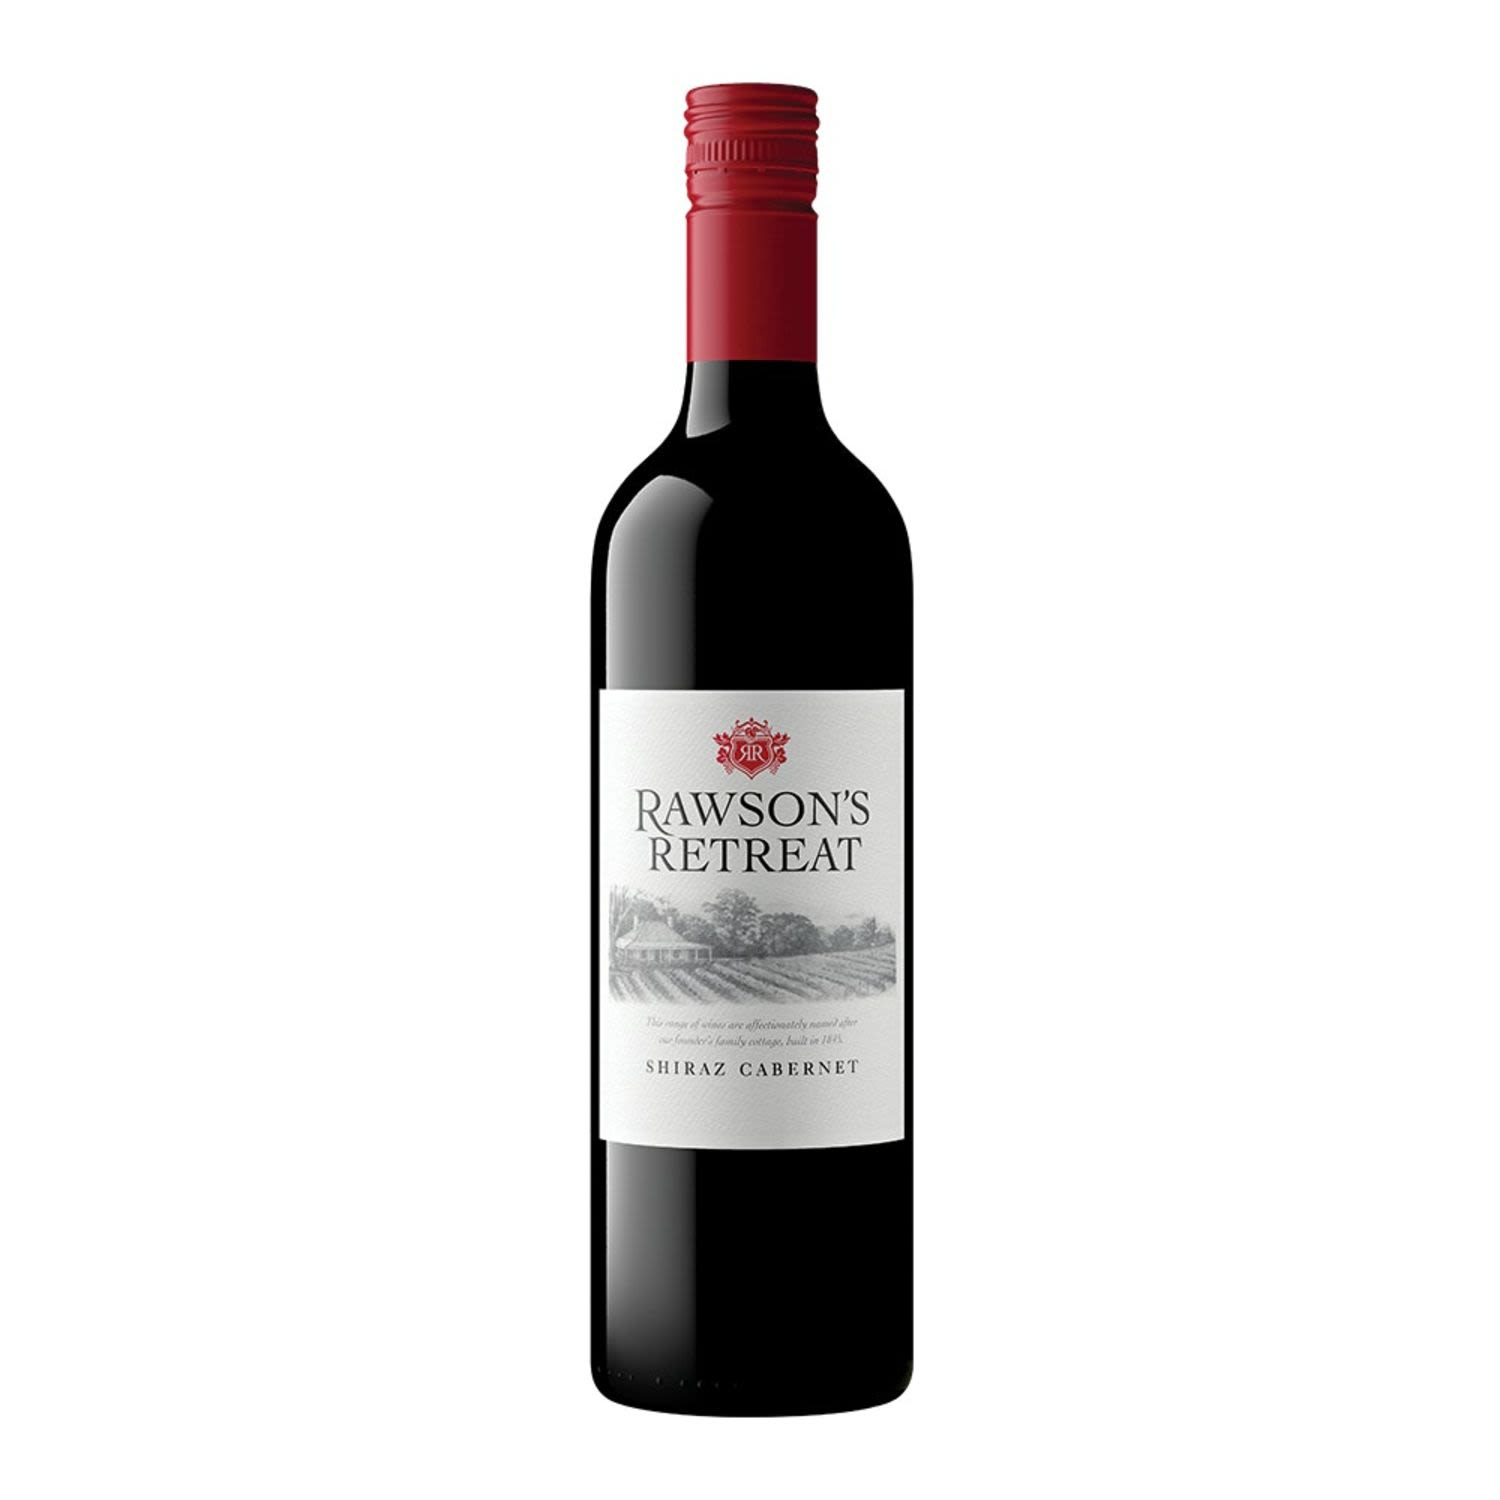 Lifted cherry & bramble berries are well supported with integrated spicy, cedary oak. Medium bodied style with fine, rounded tannins.<br /> <br />Alcohol Volume: 13.50%<br /><br />Pack Format: 6 Pack<br /><br />Standard Drinks: 8<br /><br />Pack Type: Bottle<br /><br />Country of Origin: Australia<br /><br />Region: South Eastern Australia<br /><br />Vintage: Vintages Vary<br />